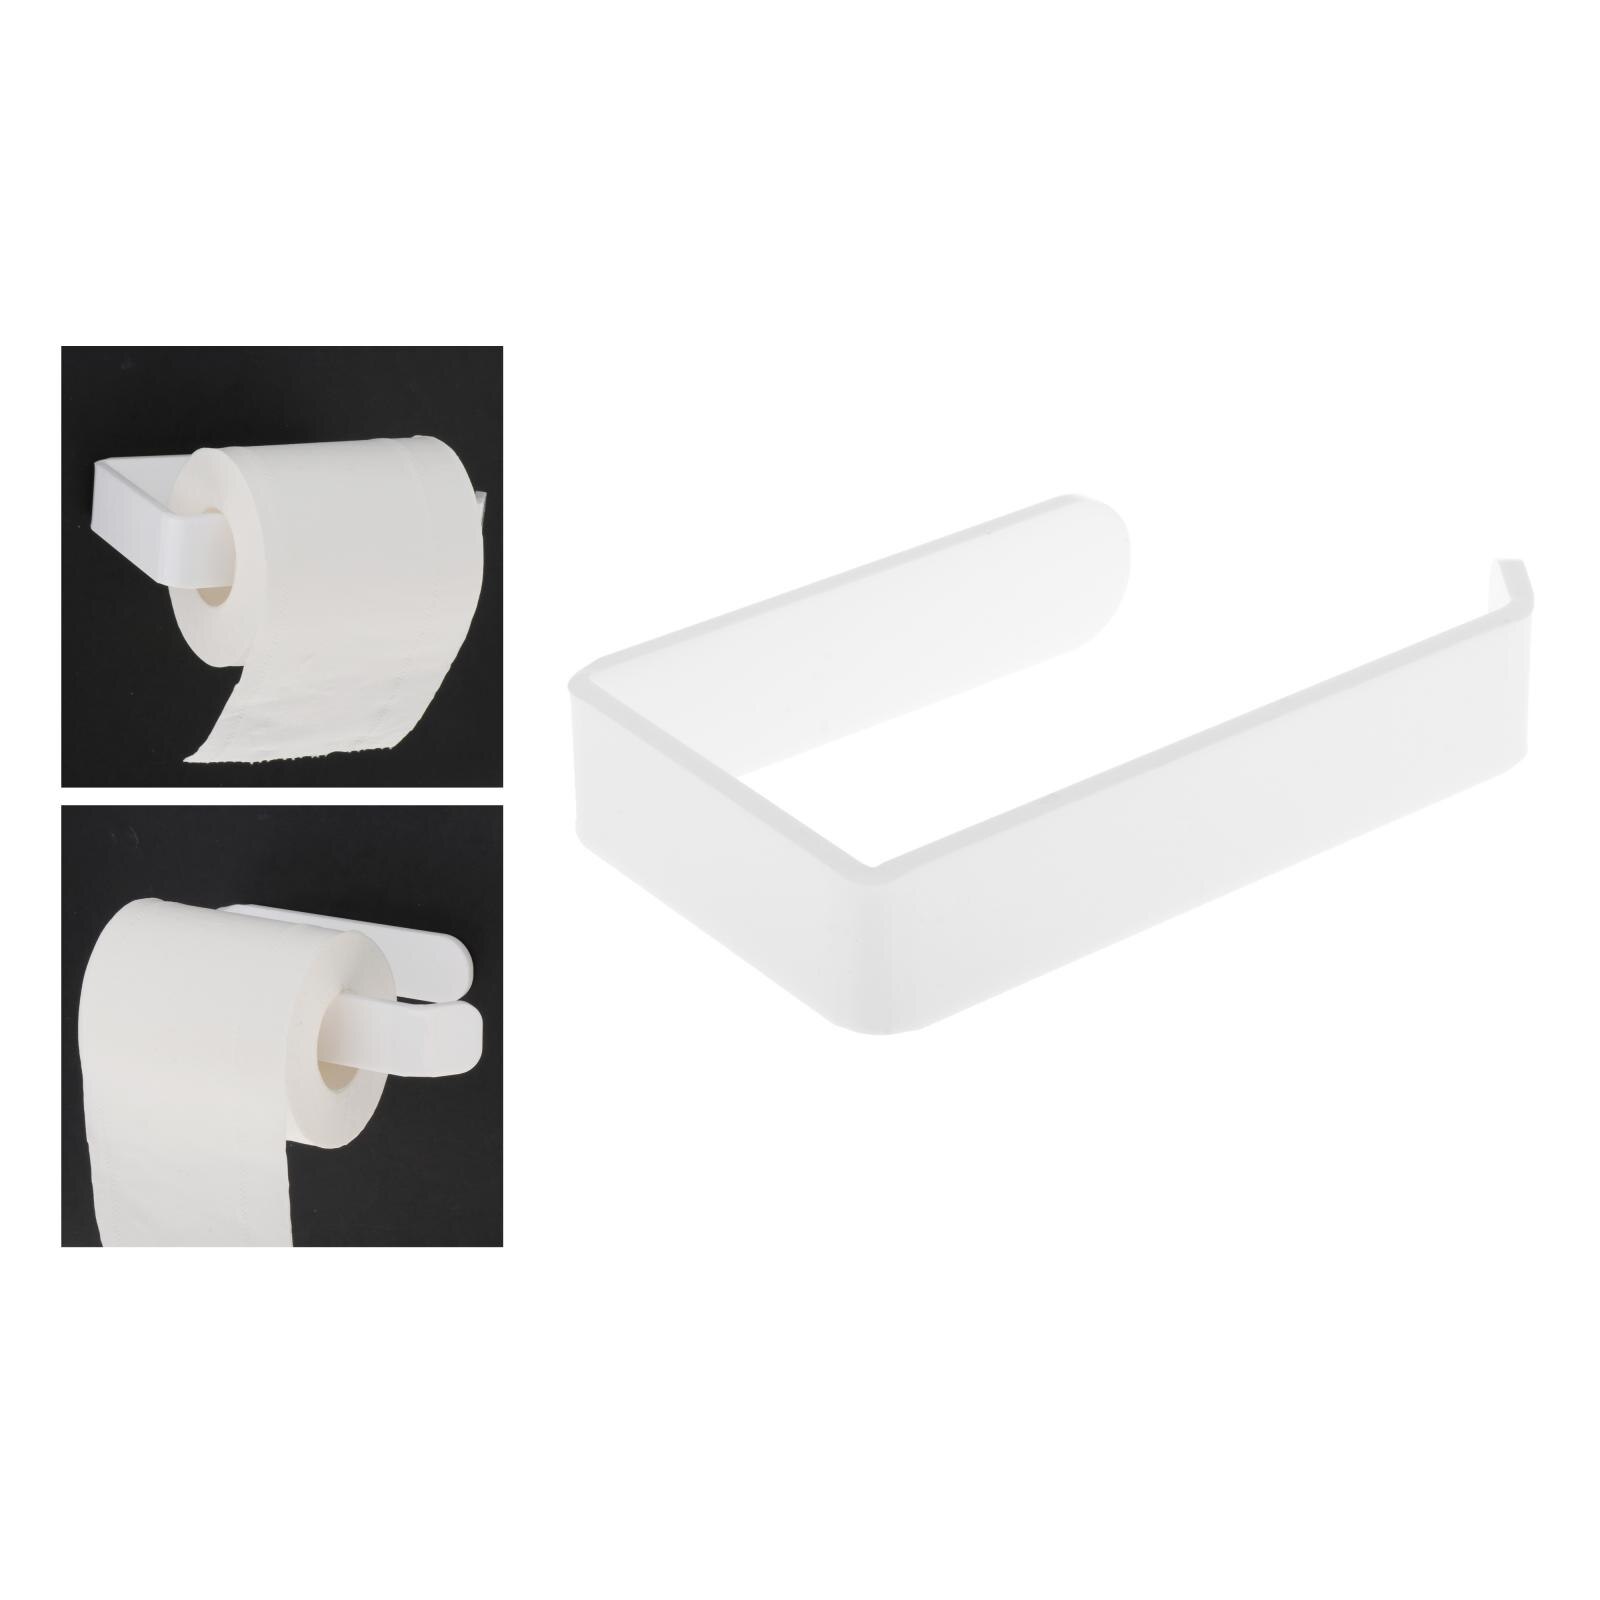 Wall Mount Paper Holder, White Acrylic Toilet Tissue Roll Holders Hangers for Bathroom Kitchen Easy to Install for Wall Tile